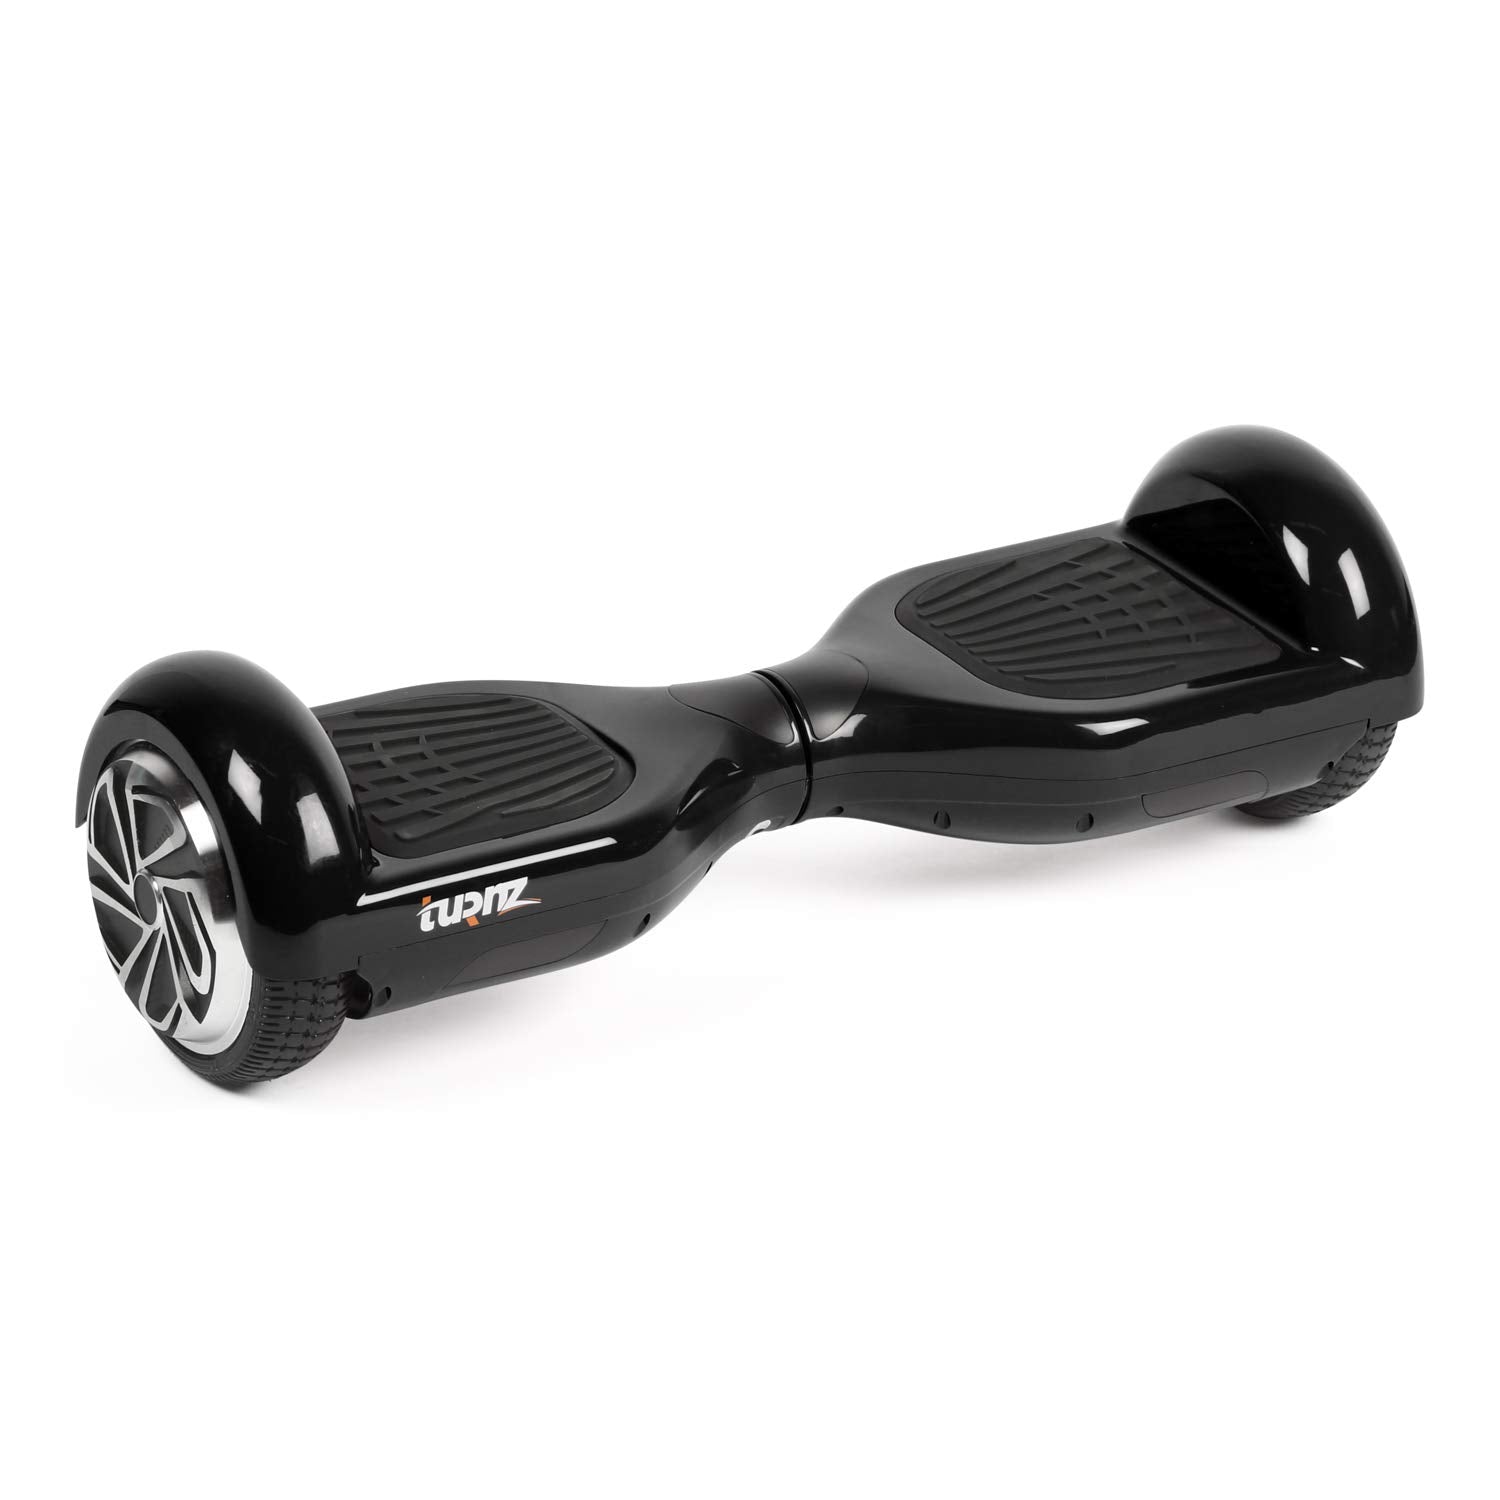 tuRnz Valley650 Self Balancing Hoverboard, 500W Power, UL 2272 Certified, Bluetooth Speaker, Exceptional Long Range Ride (15.5 Miles)  - Like New